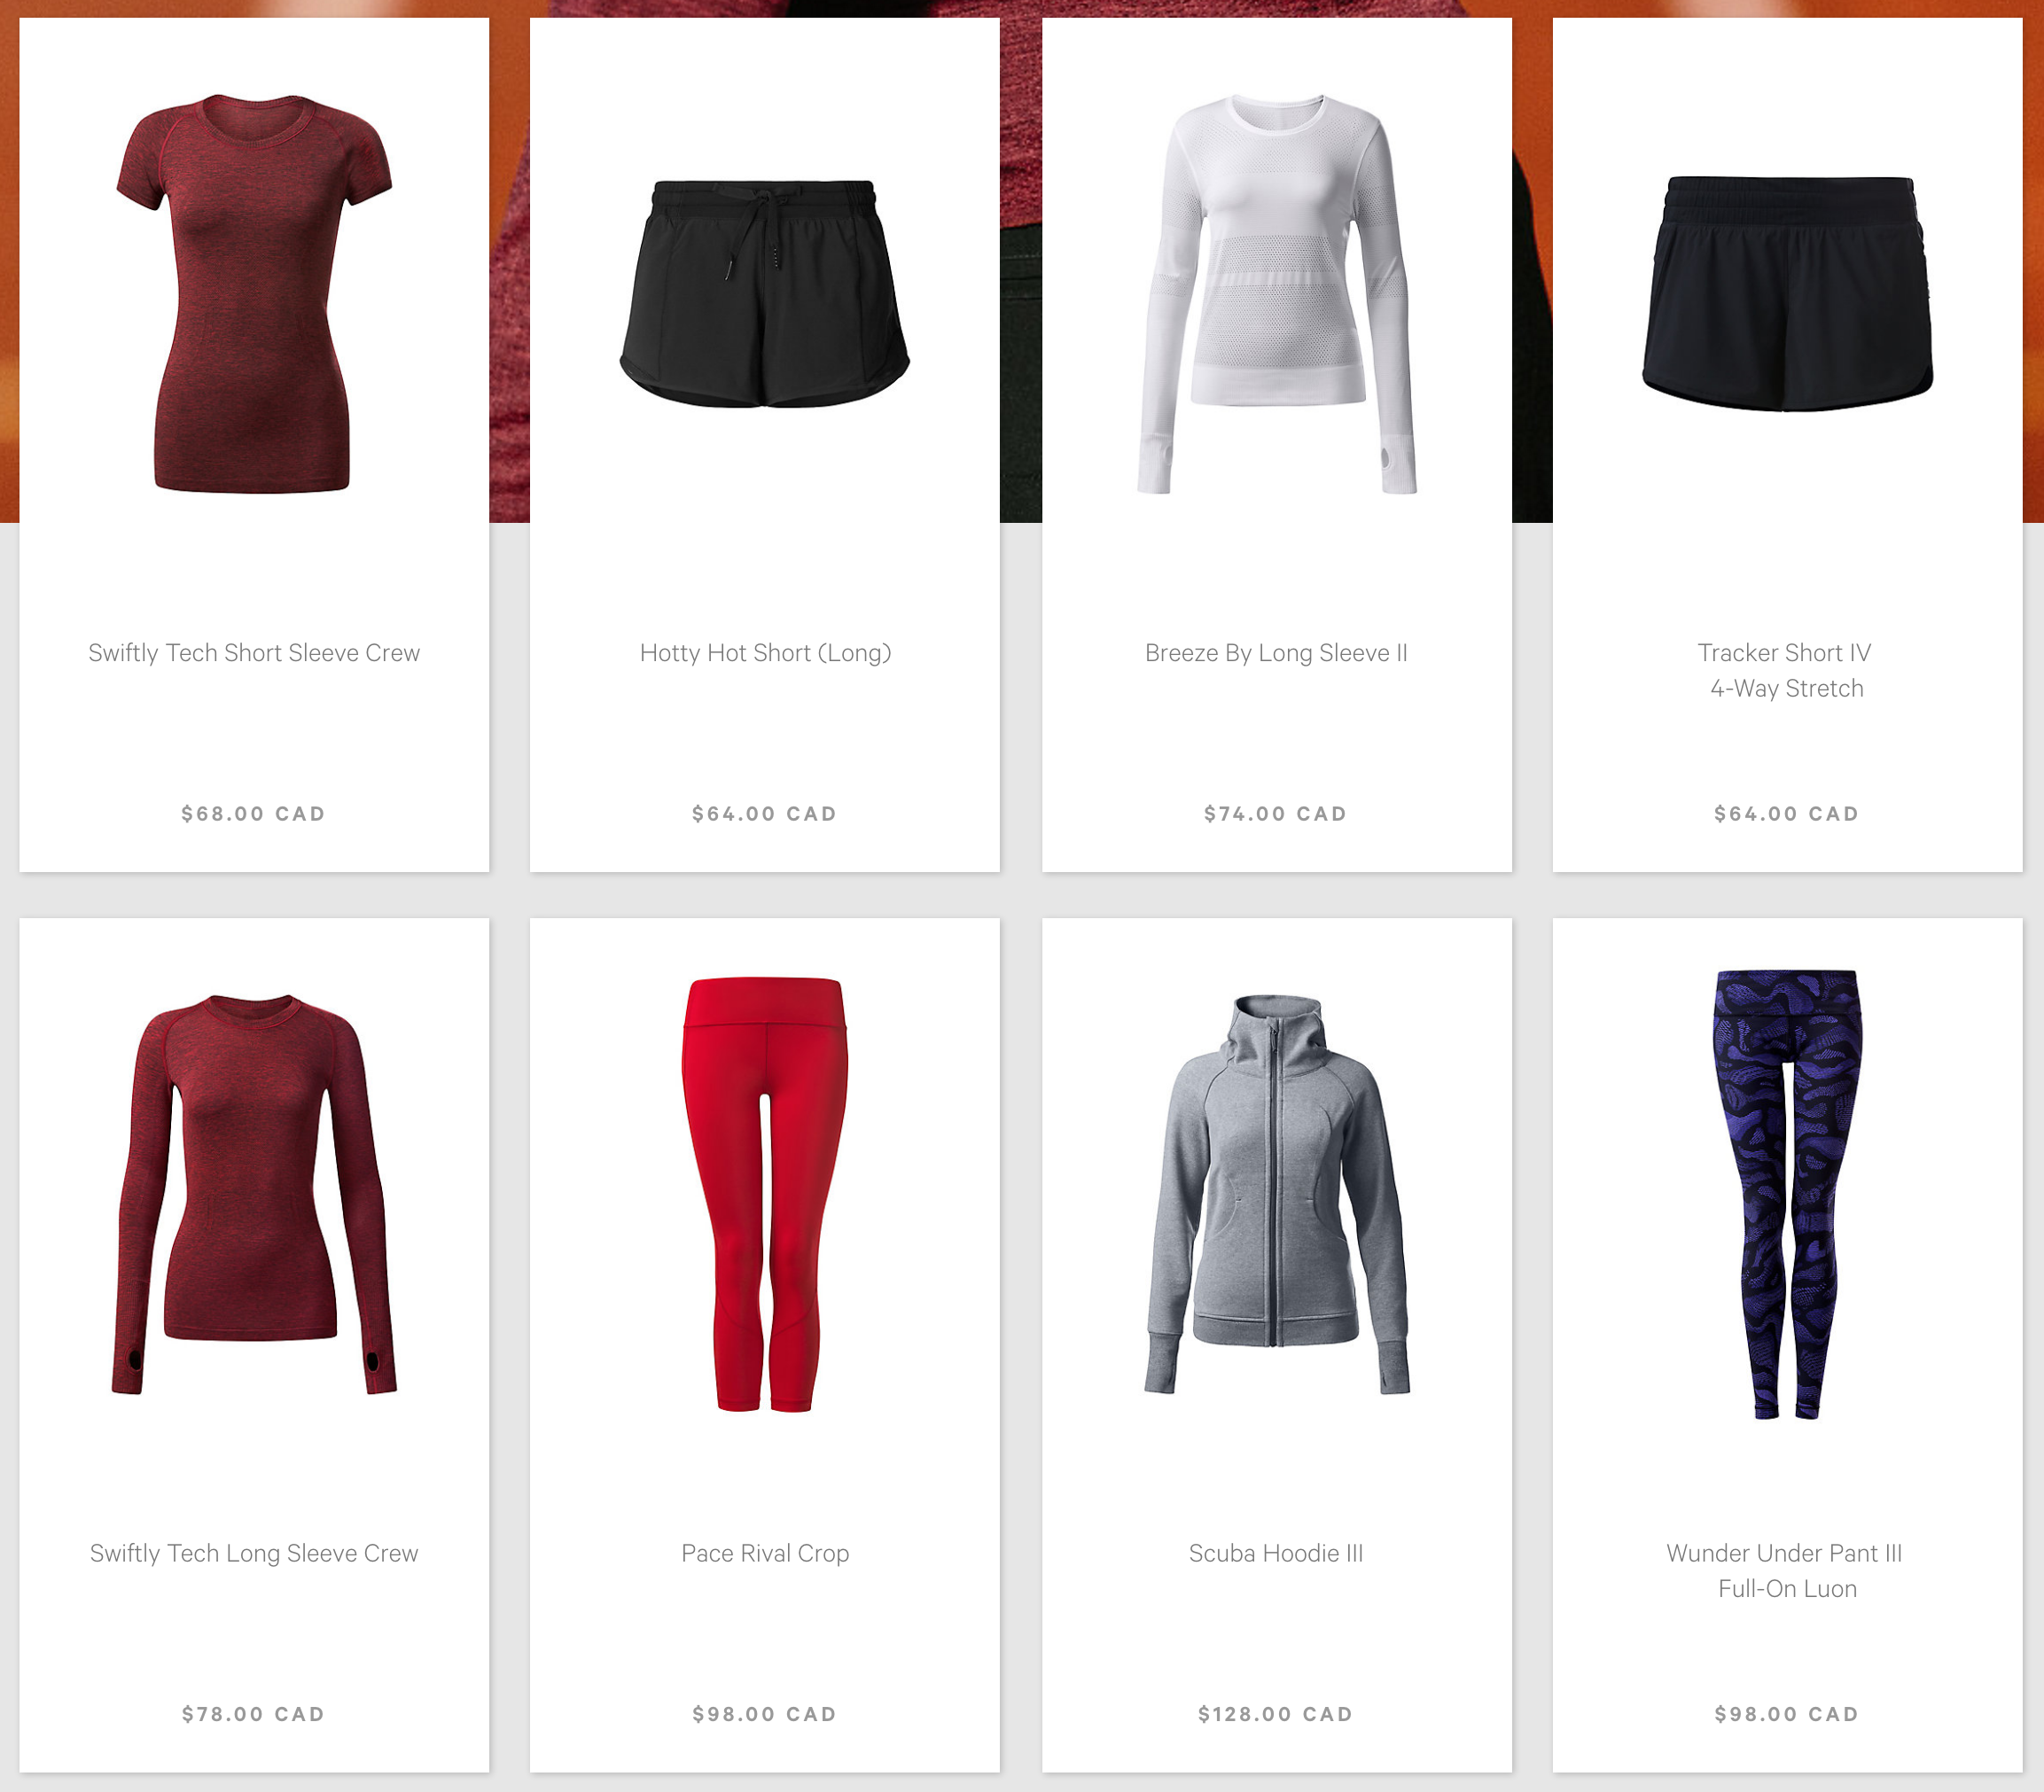 In Lululemon's sheer drama, a fashion wakeup call about yoga pants